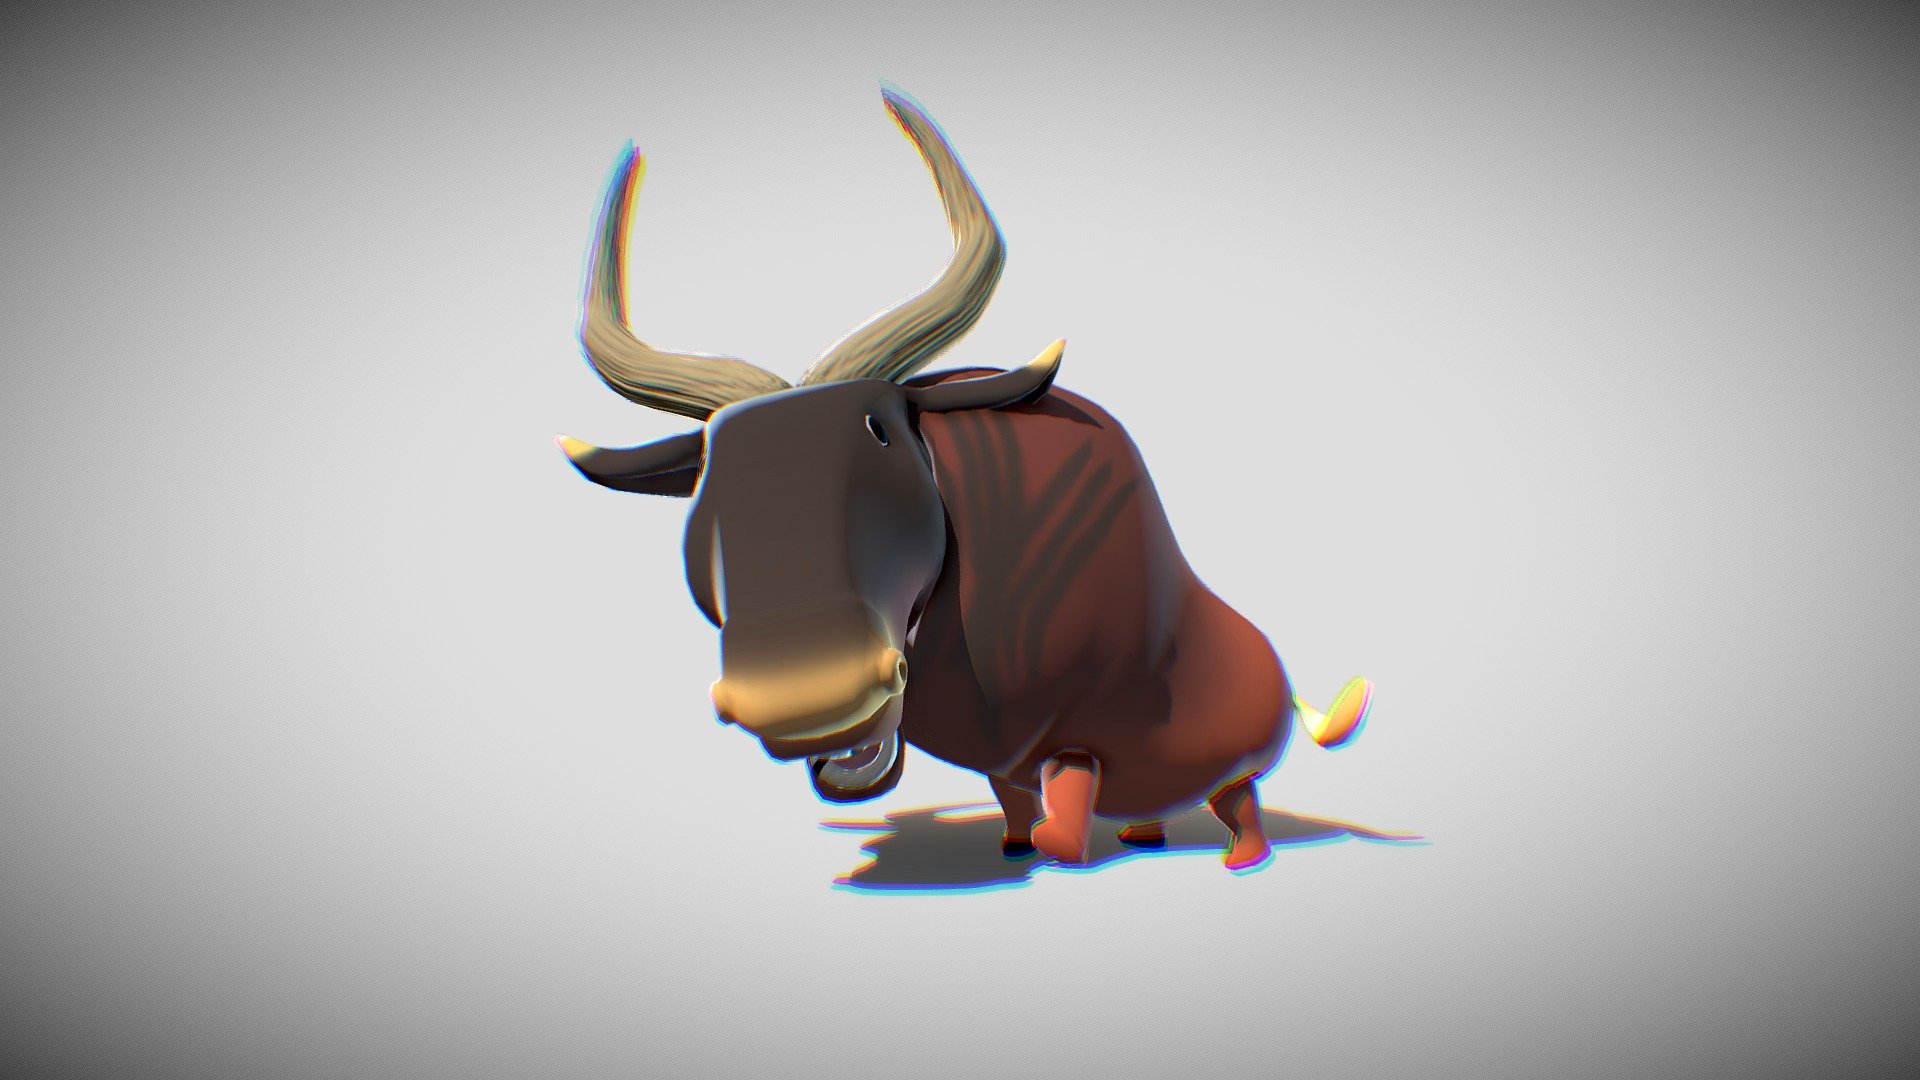 Cartoon buffalo model, film and television animation model, who has bound to transfer the drawing
= = = = = = = = = = = = = = = = = = = = = = = = = = = = = = = = = = = = = = = = = = = = = = = = 
Other works ~ welcome to visit my home page - Cartoon buffalo cartoon yak cartoon cow - Buy Royalty Free 3D model by mpc199075 3d model